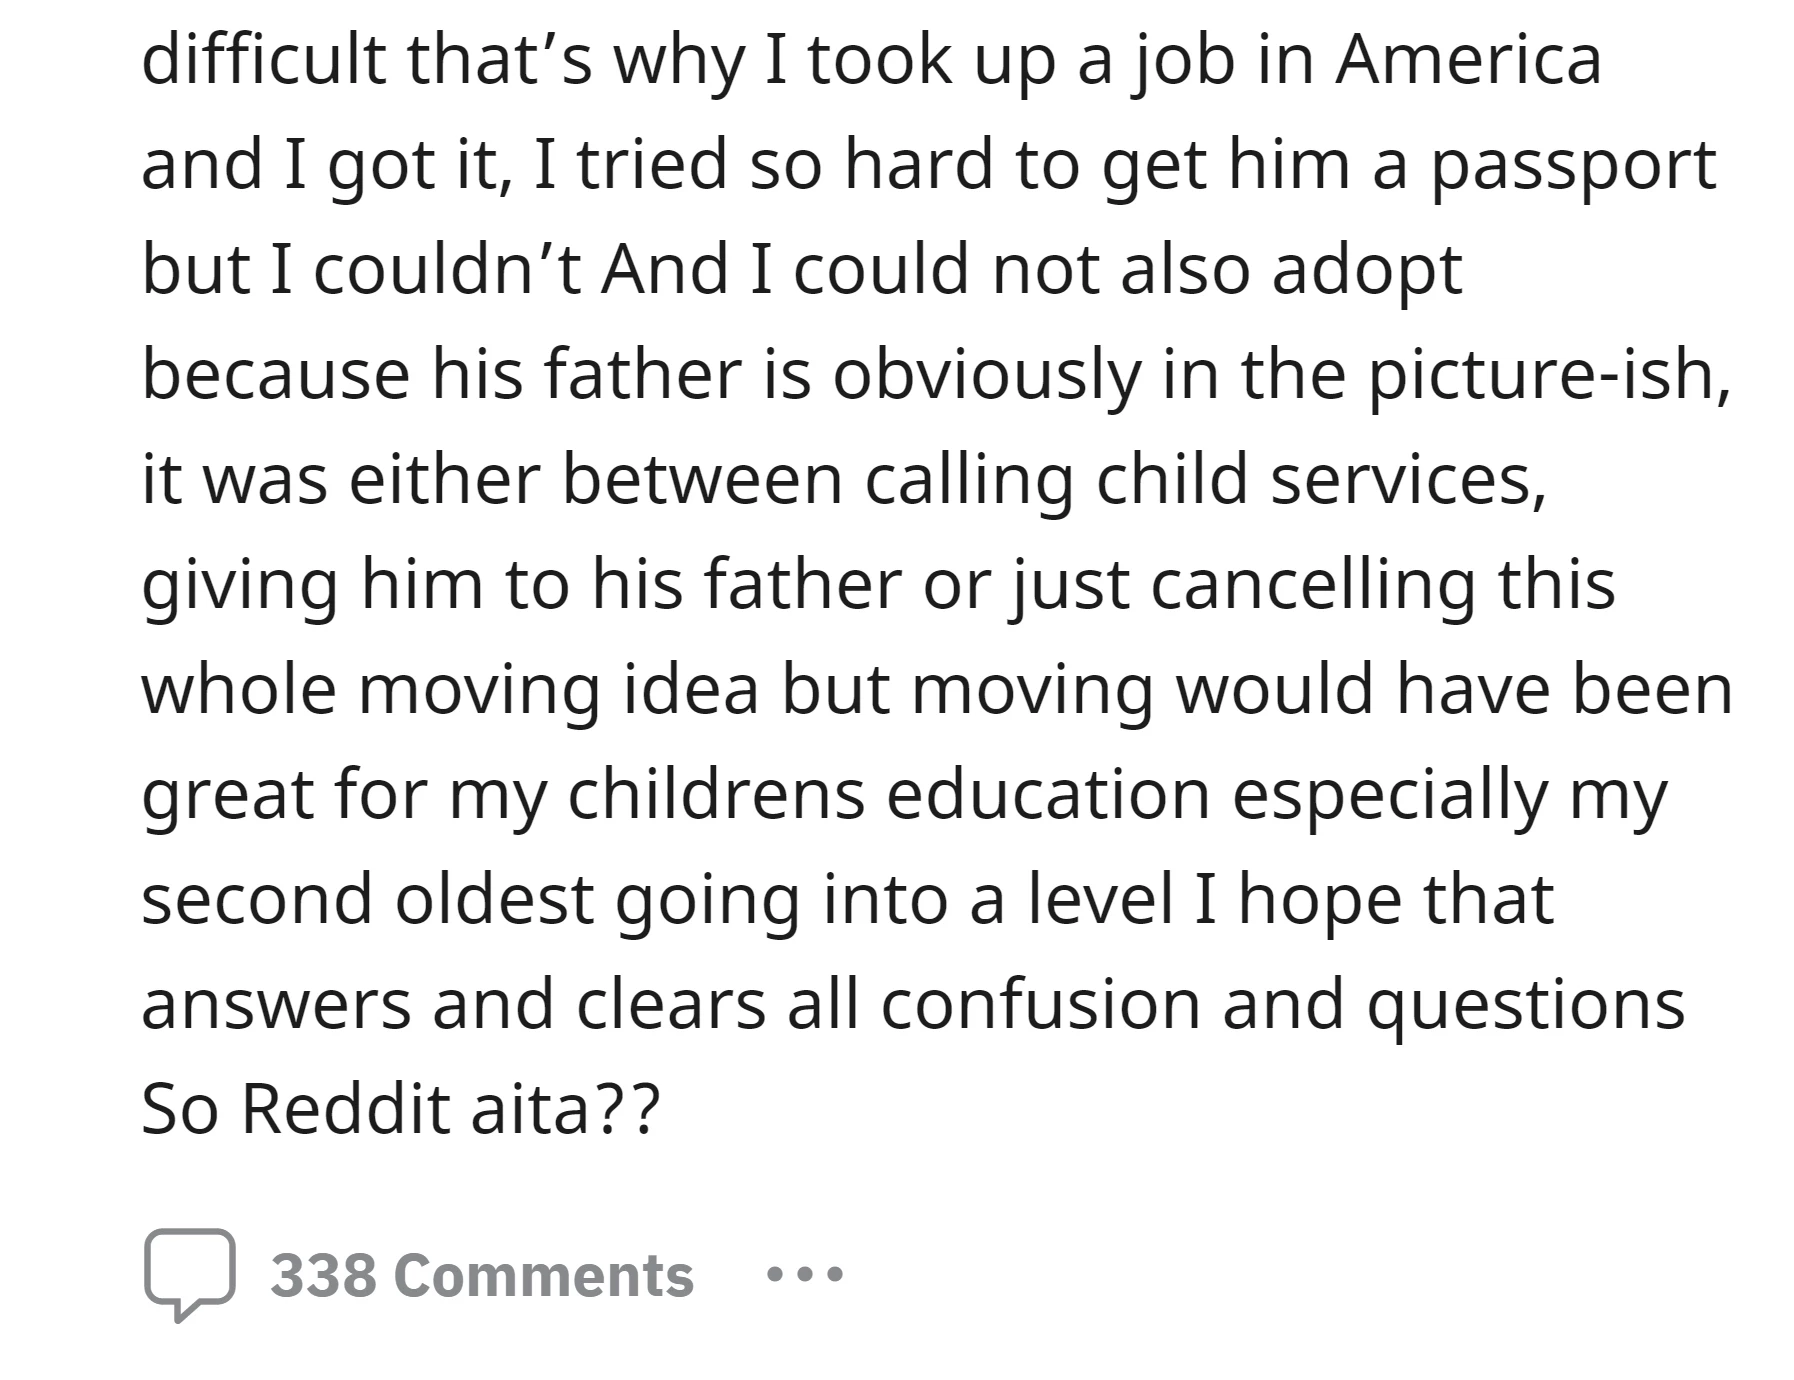 OP took a job in America to improve their family's financial situation